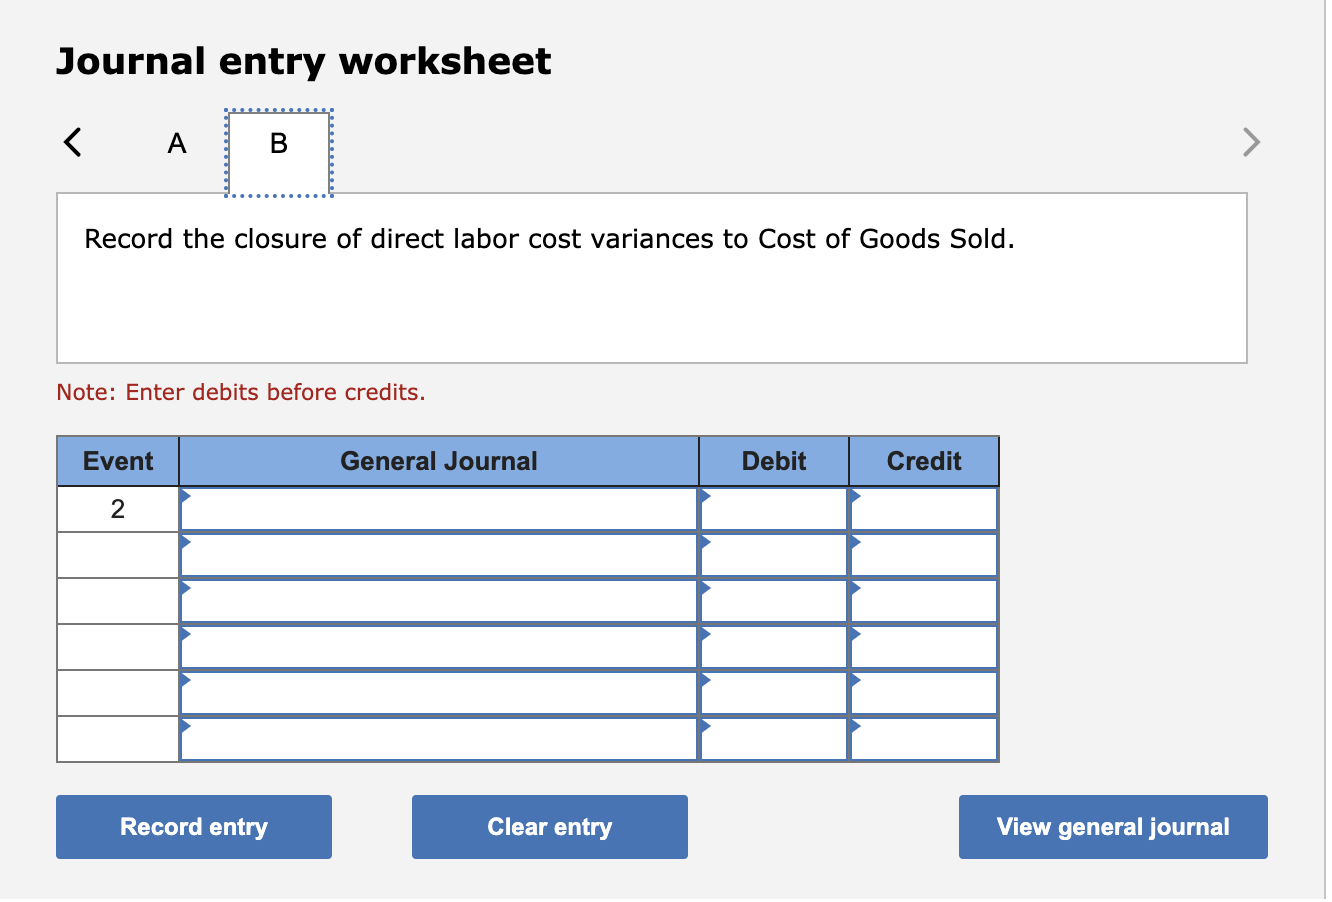 Journal entry worksheet < A B Record the closure of direct labor cost variances to Cost of Goods Sold. Note: